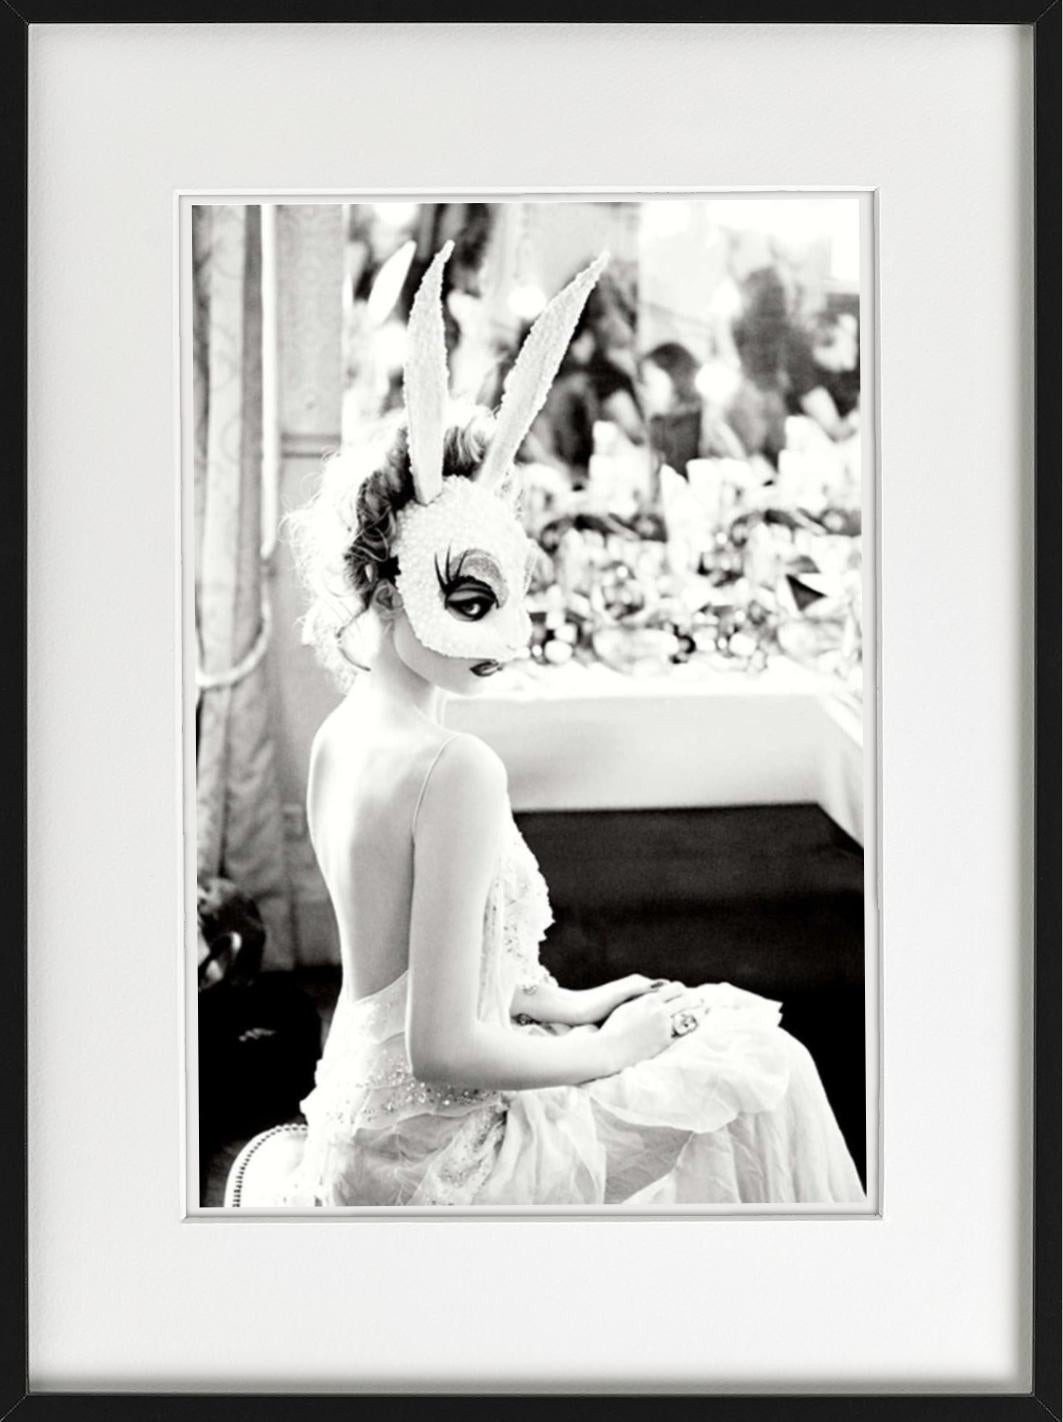 White Bunny - Model with crystalised bunny Mask, b&w fine art photography, 2012 - Photograph by Ellen von Unwerth